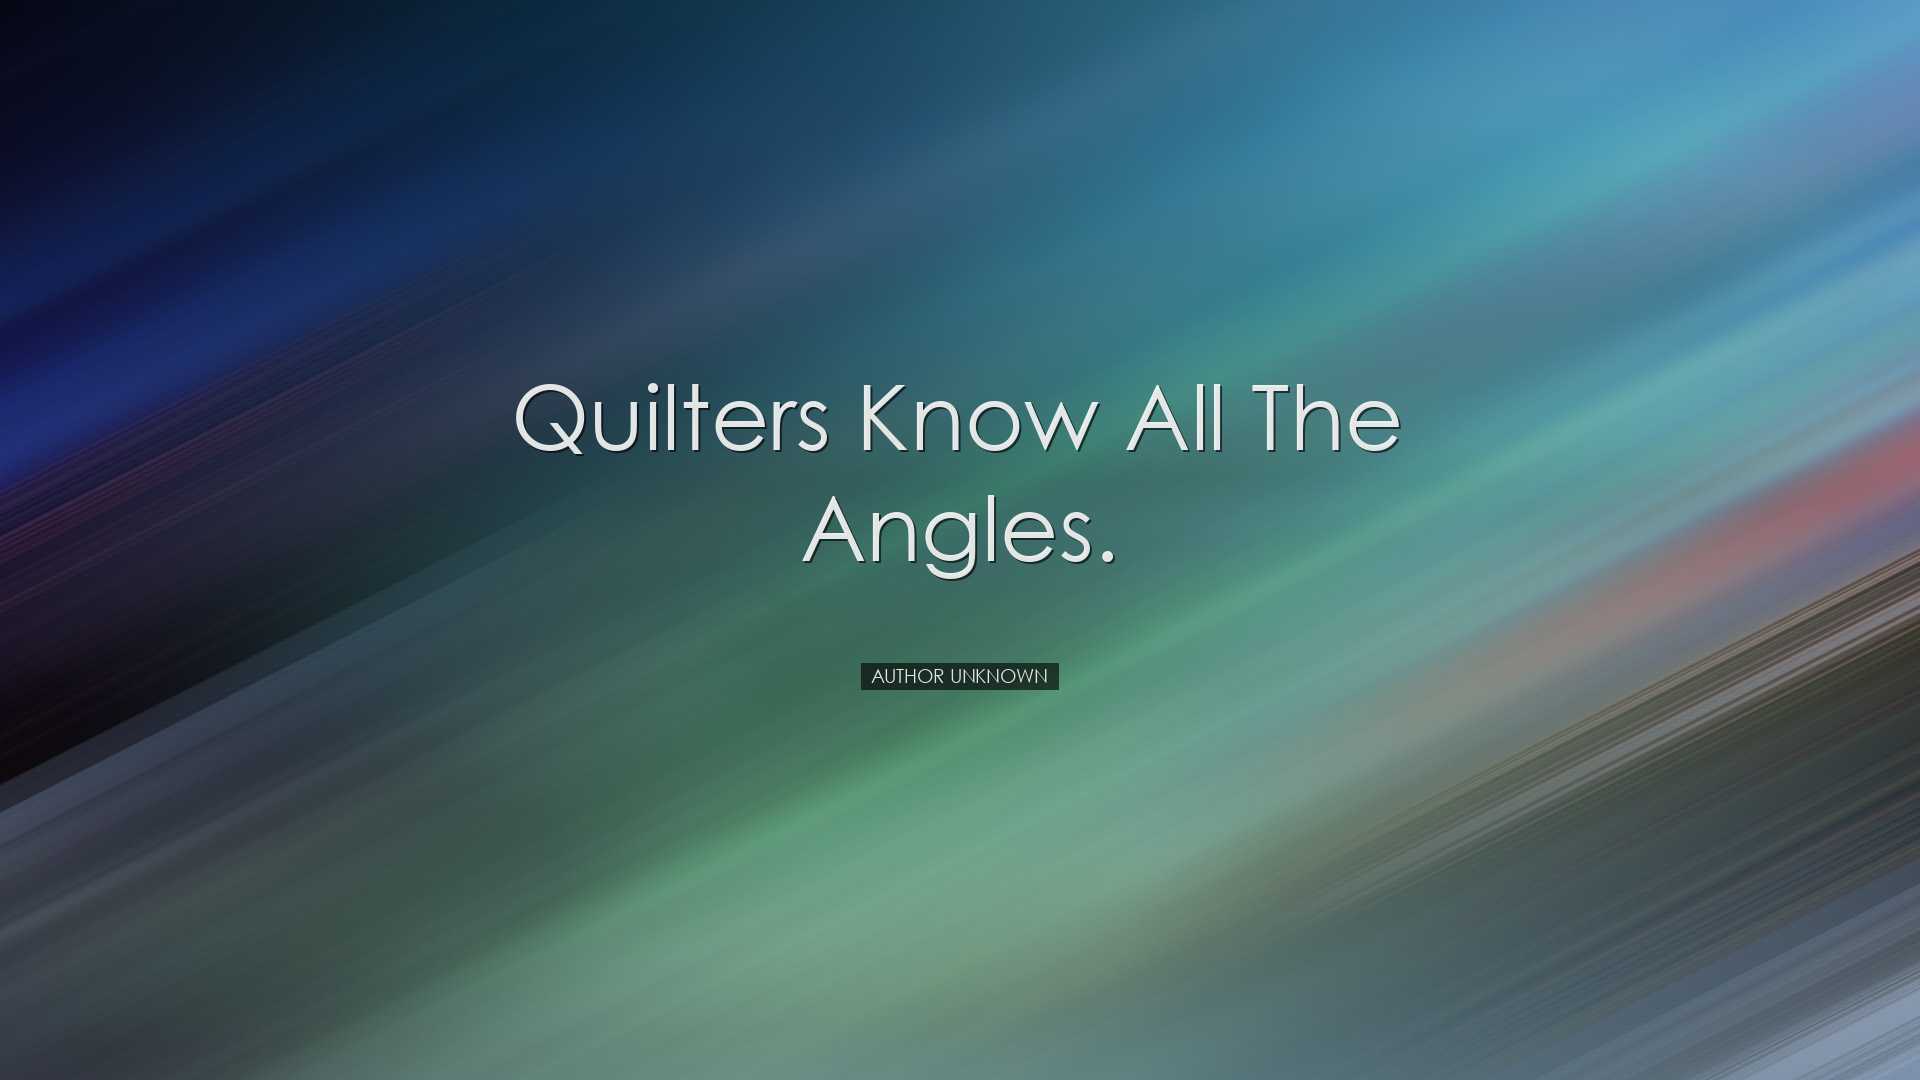 Quilters know all the angles. - Author Unknown